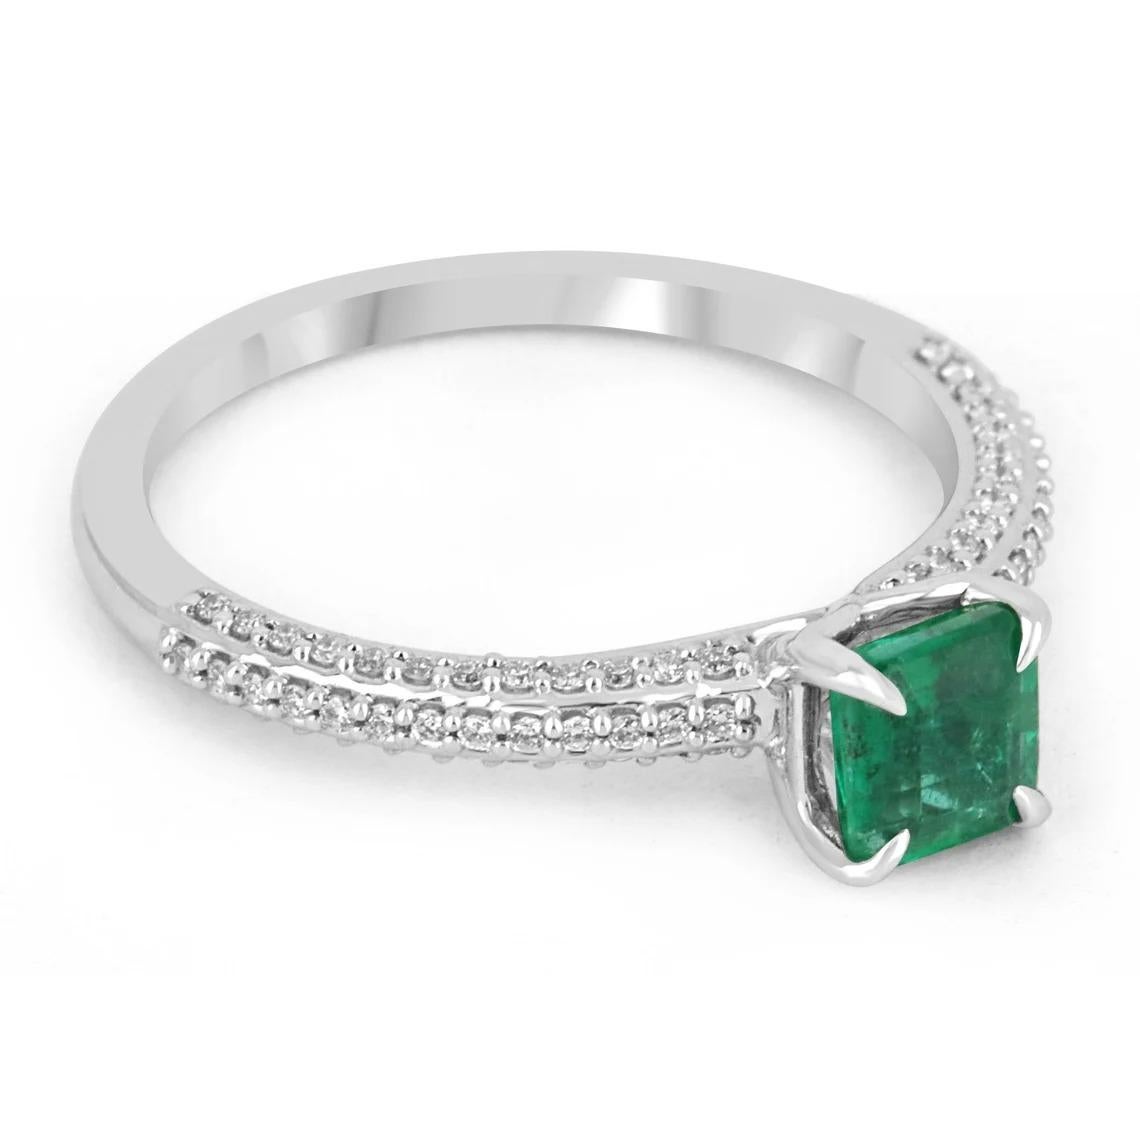 Elegantly displayed is a natural Asscher-cut emerald and diamond ring. The center gem is a beautiful quality, Asscher cut, emerald filled with life and brilliance! Among the emeralds, impressive qualities are their vibrant color and beautiful eye